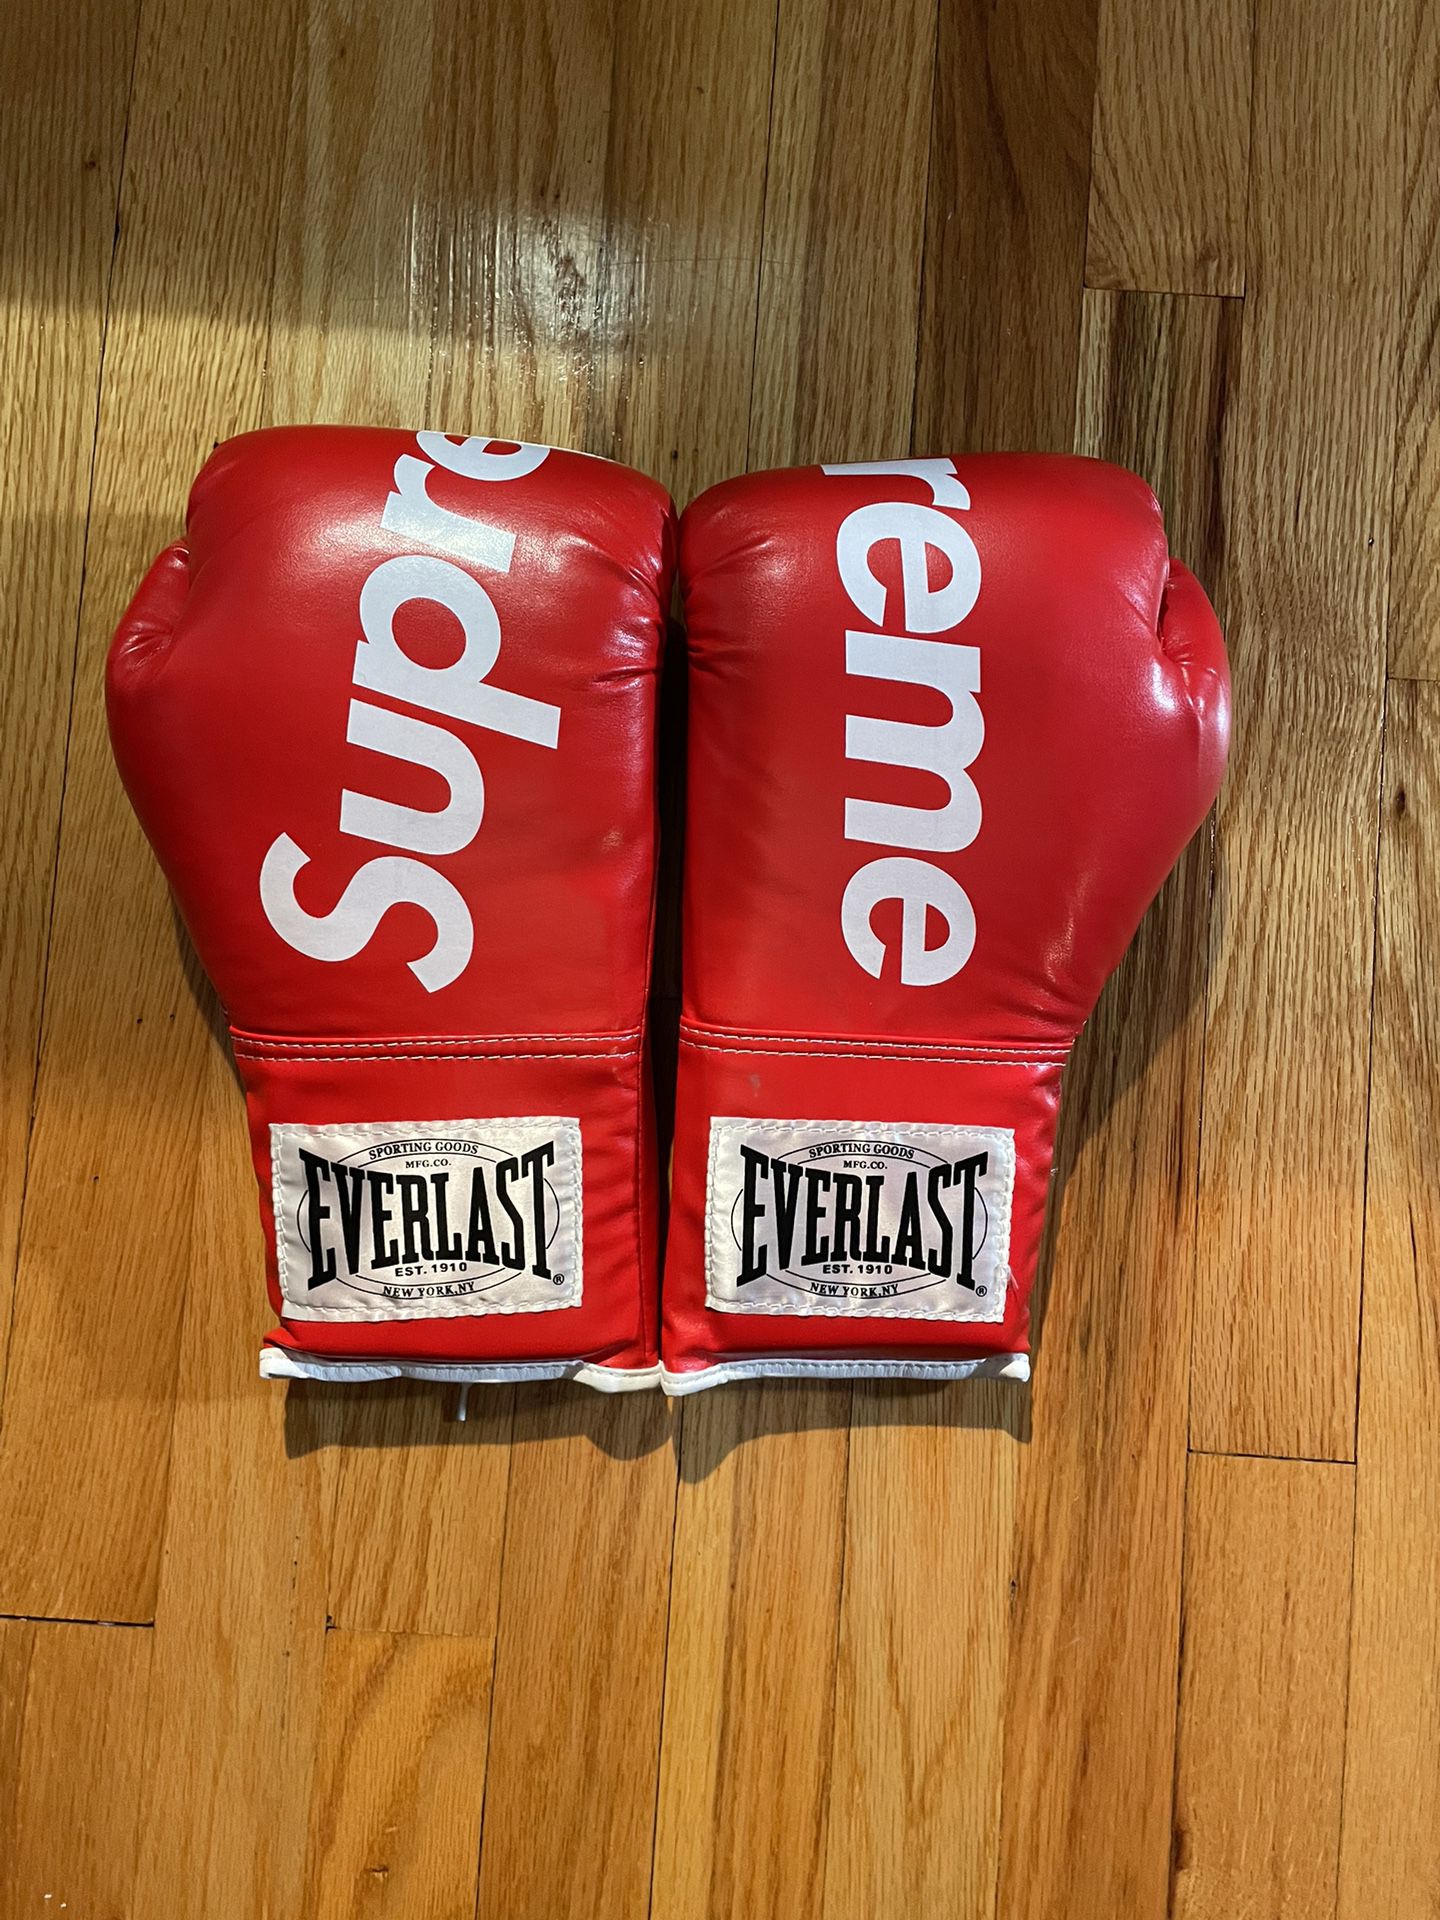 Deadstock Supreme x Everlast “Blue” boxing gloves from 2008